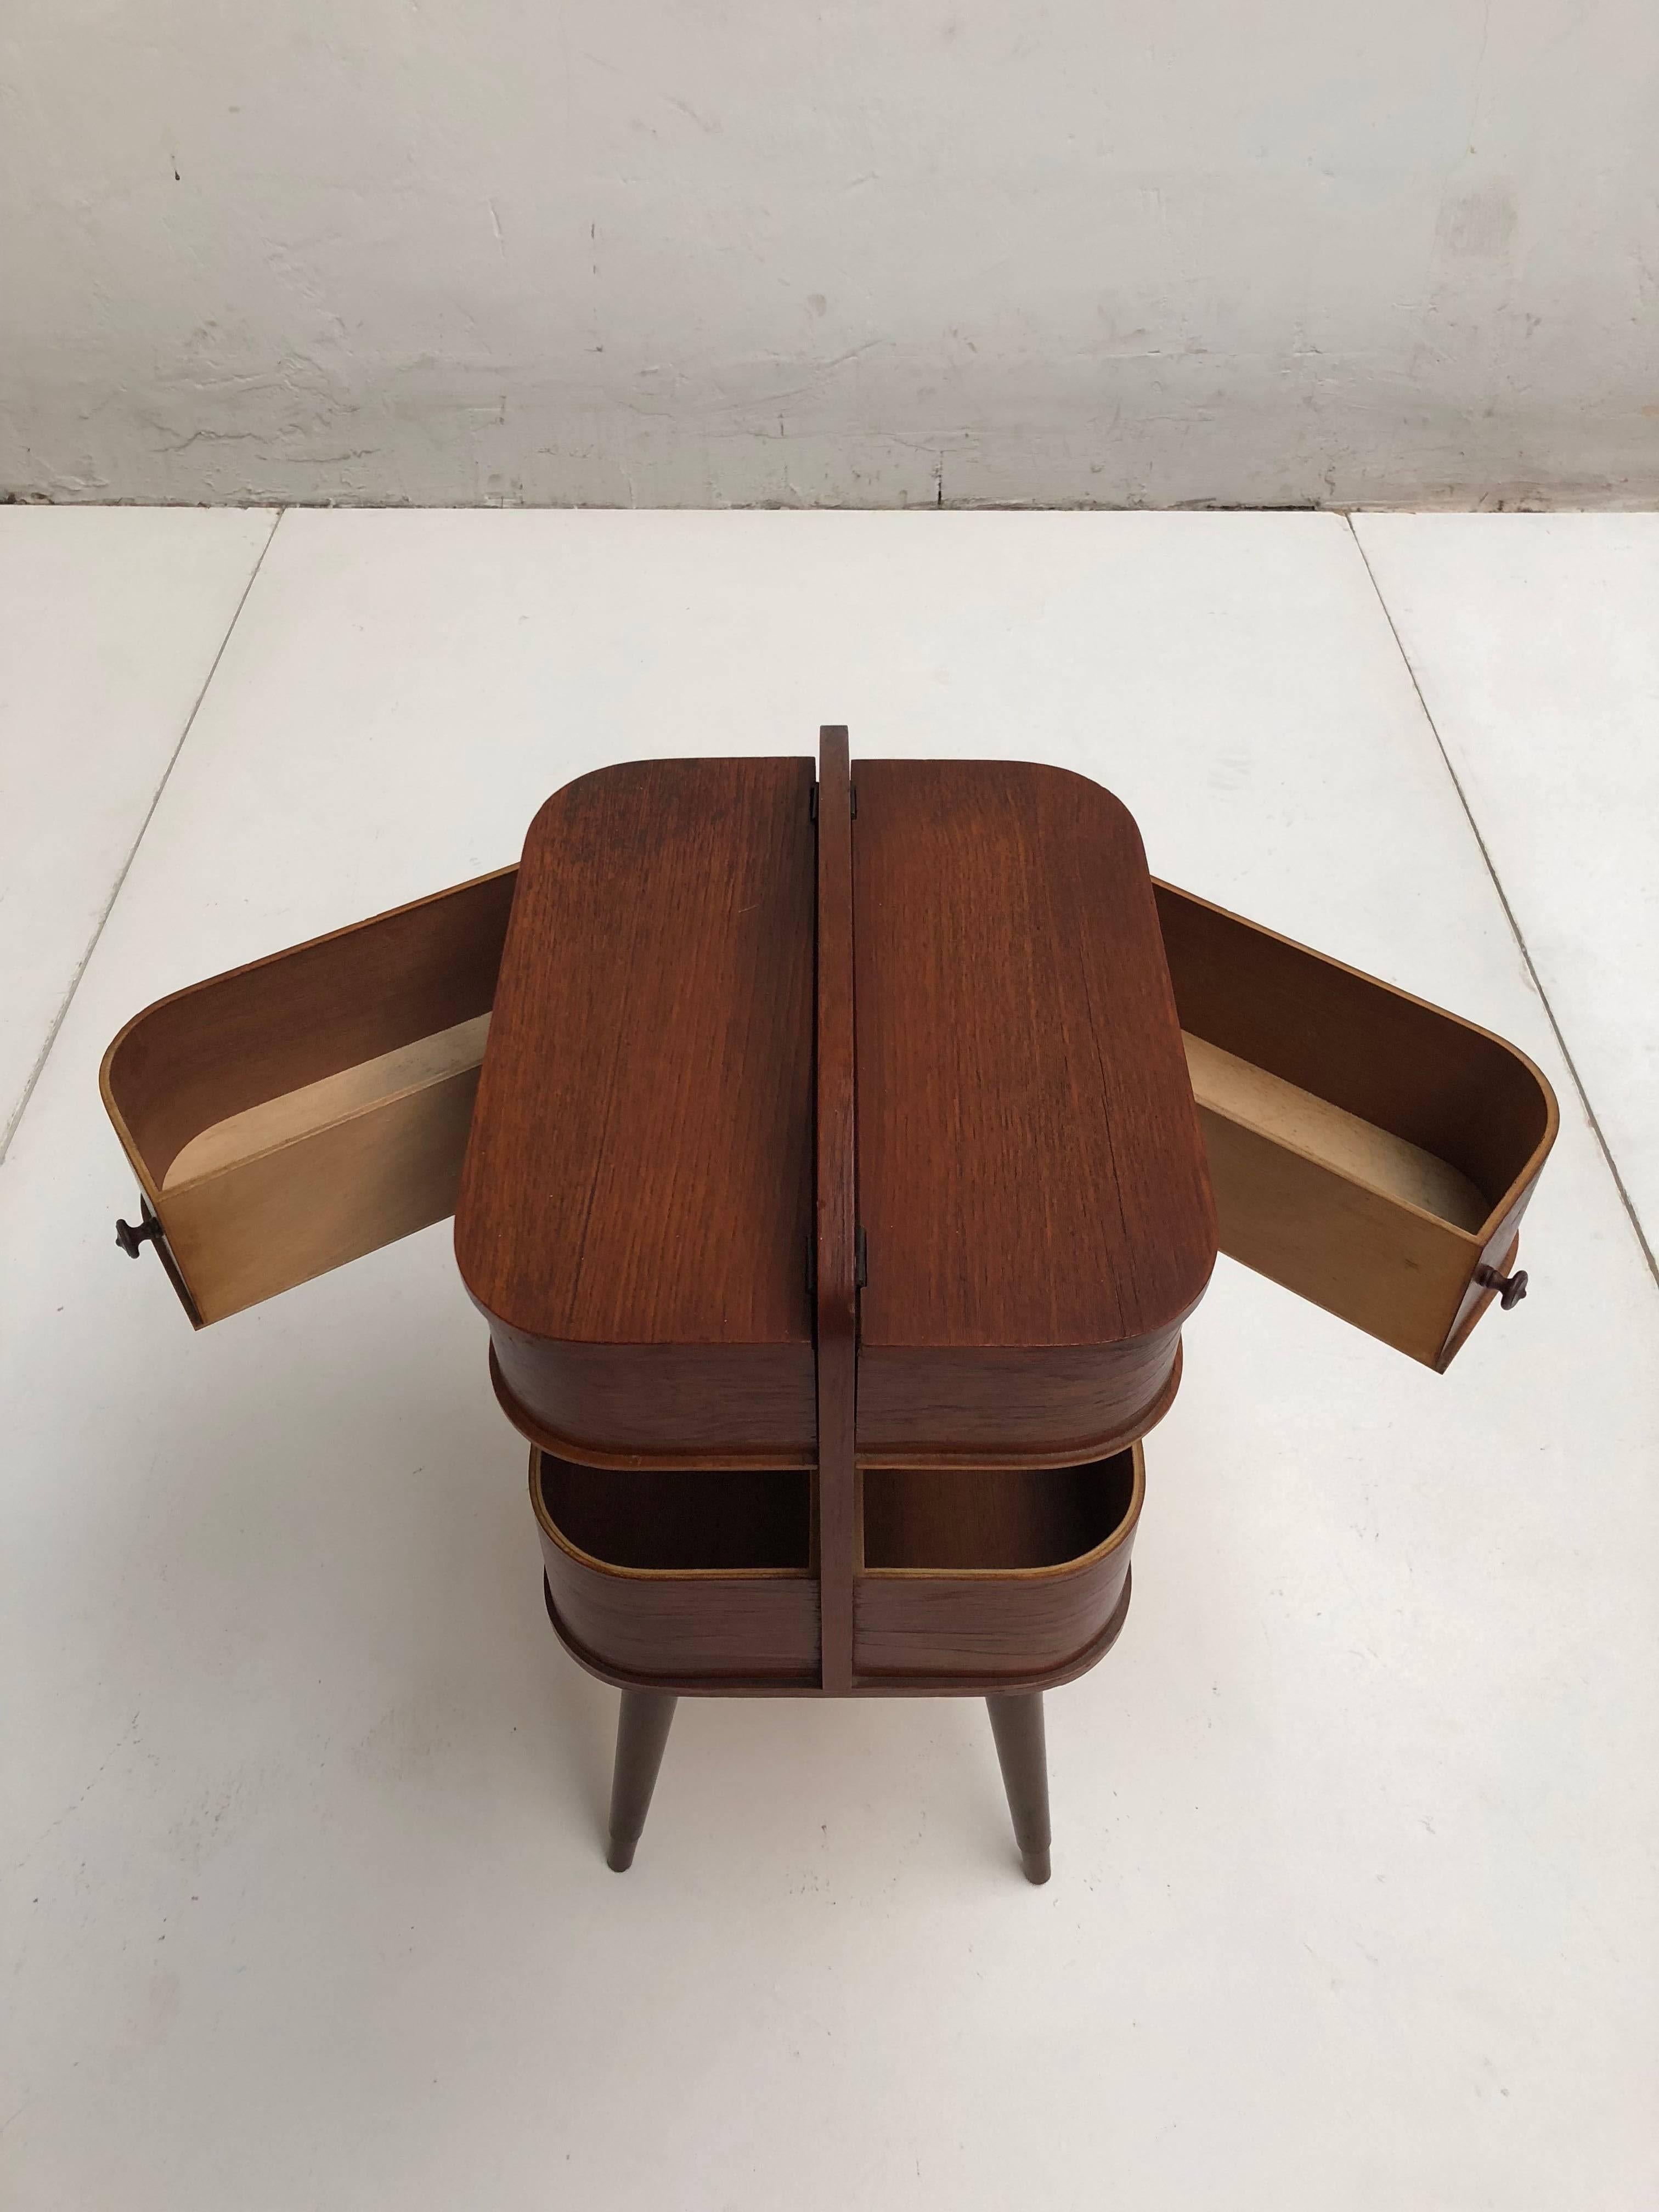 Adorable Danish Teak Plywood Sewing Box Distributed by Pastoe in the 1950s 3